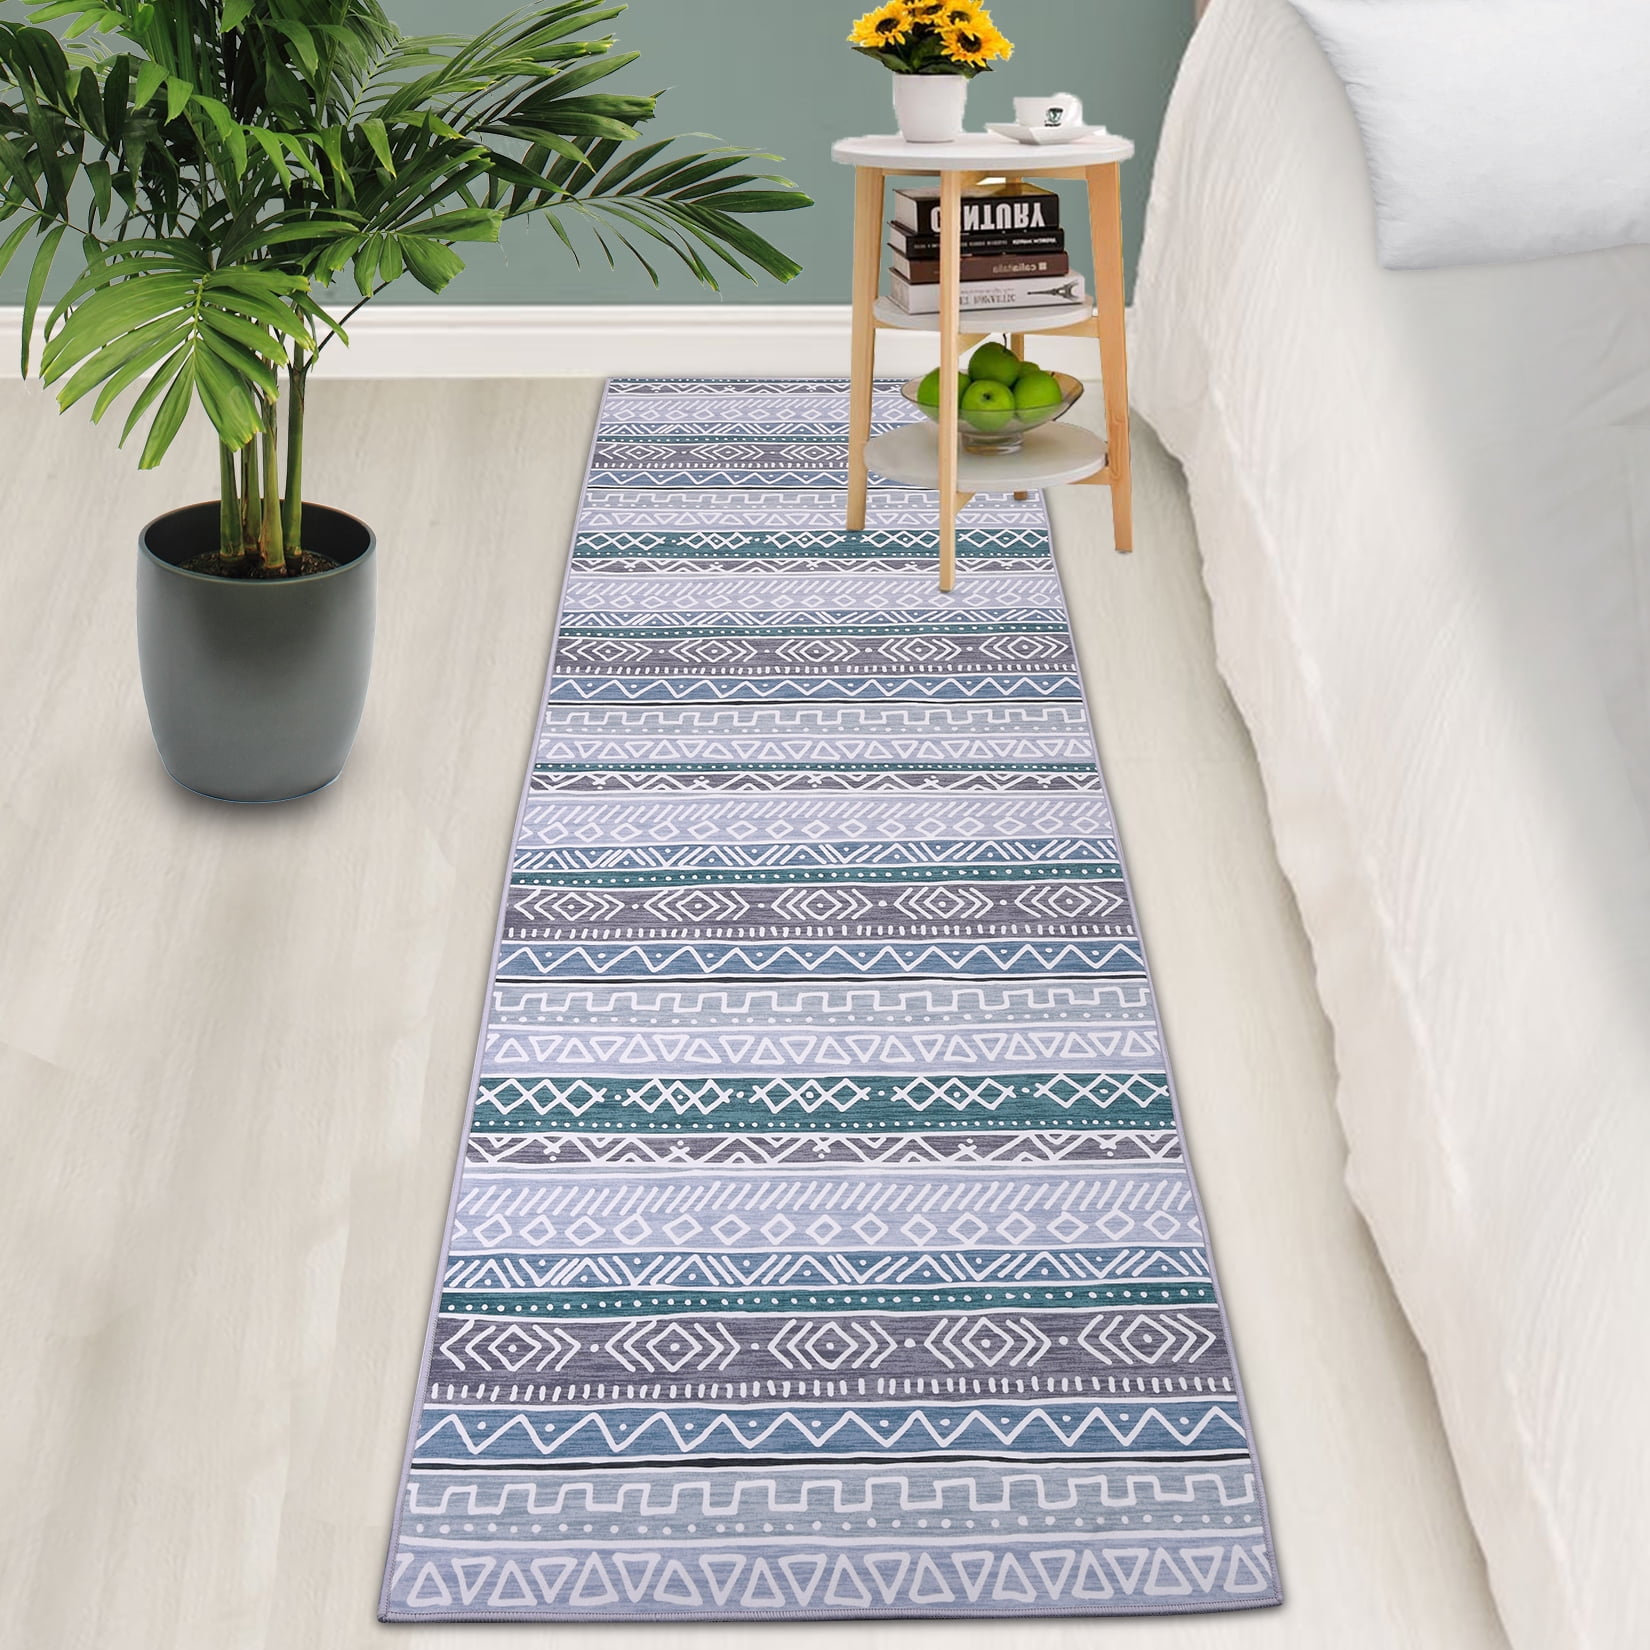 2' x 3' Runner Rugs with Rubber Backing, Indoor Outdoor Utility Carpet  Runner Rugs, Stripe Brown, Can Be Used as Aisle for The RV and Boat,  Laundry